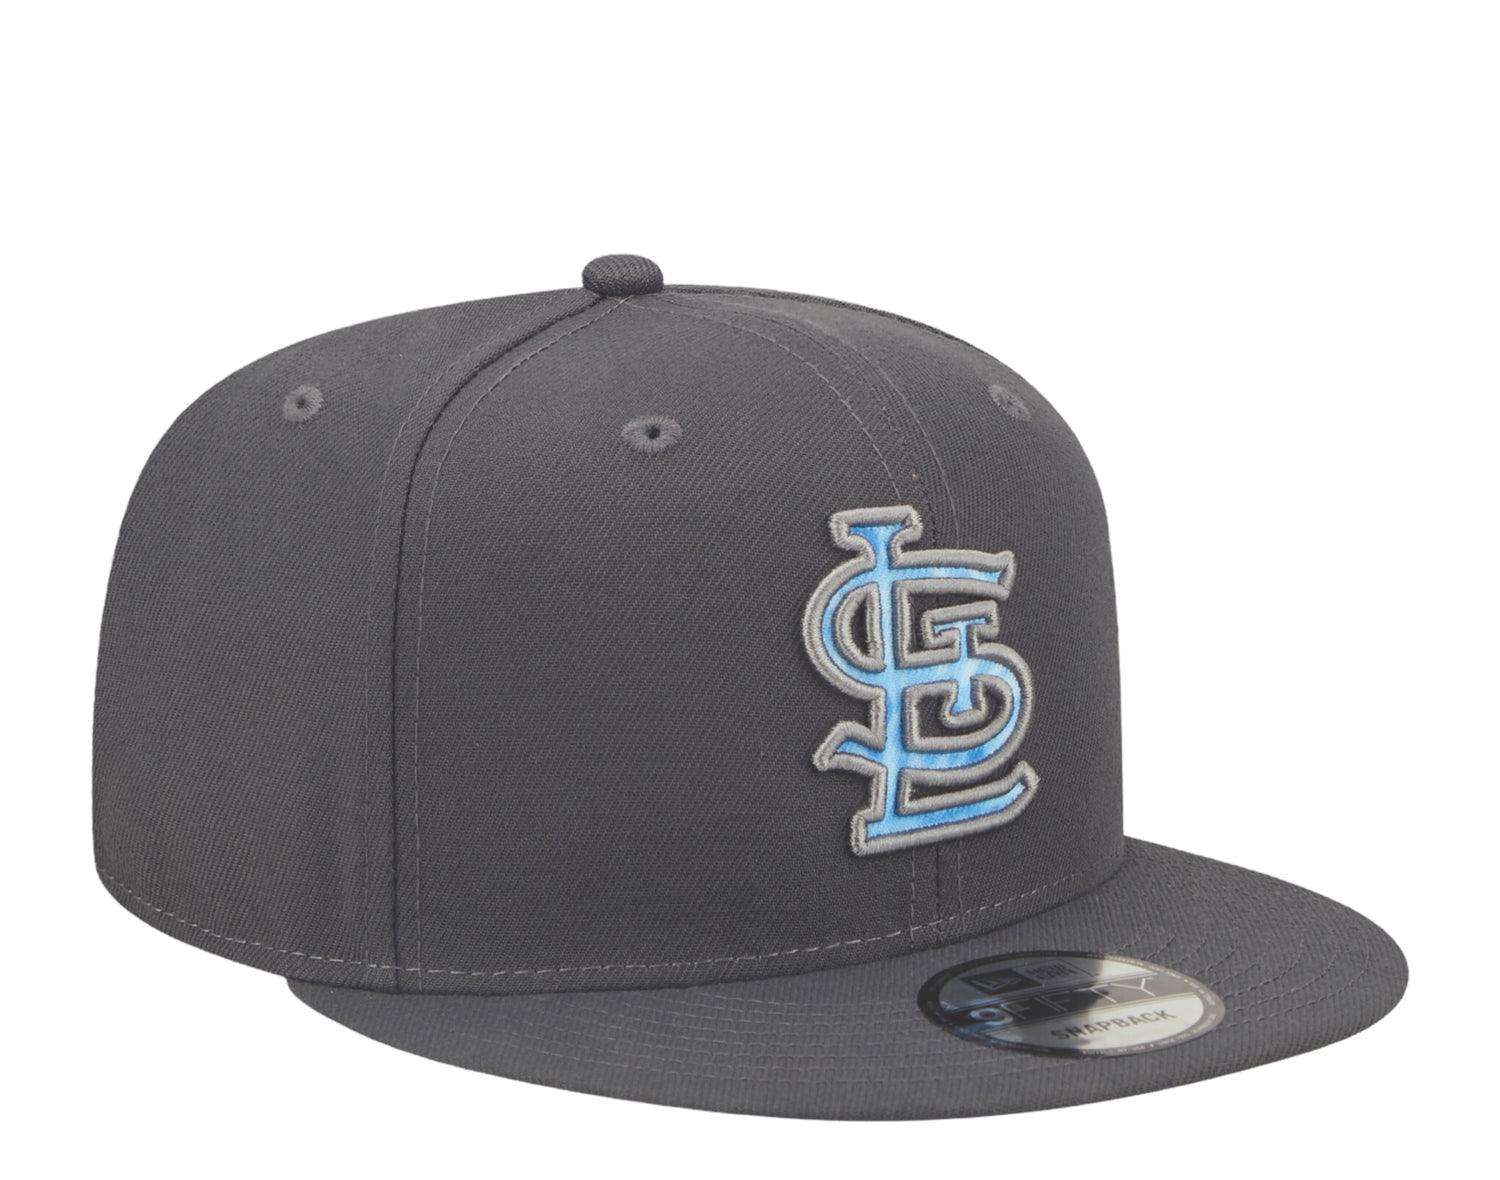 New Era 9Fifty MLB St. Louis Cardinals Father's Day Snapback Hat